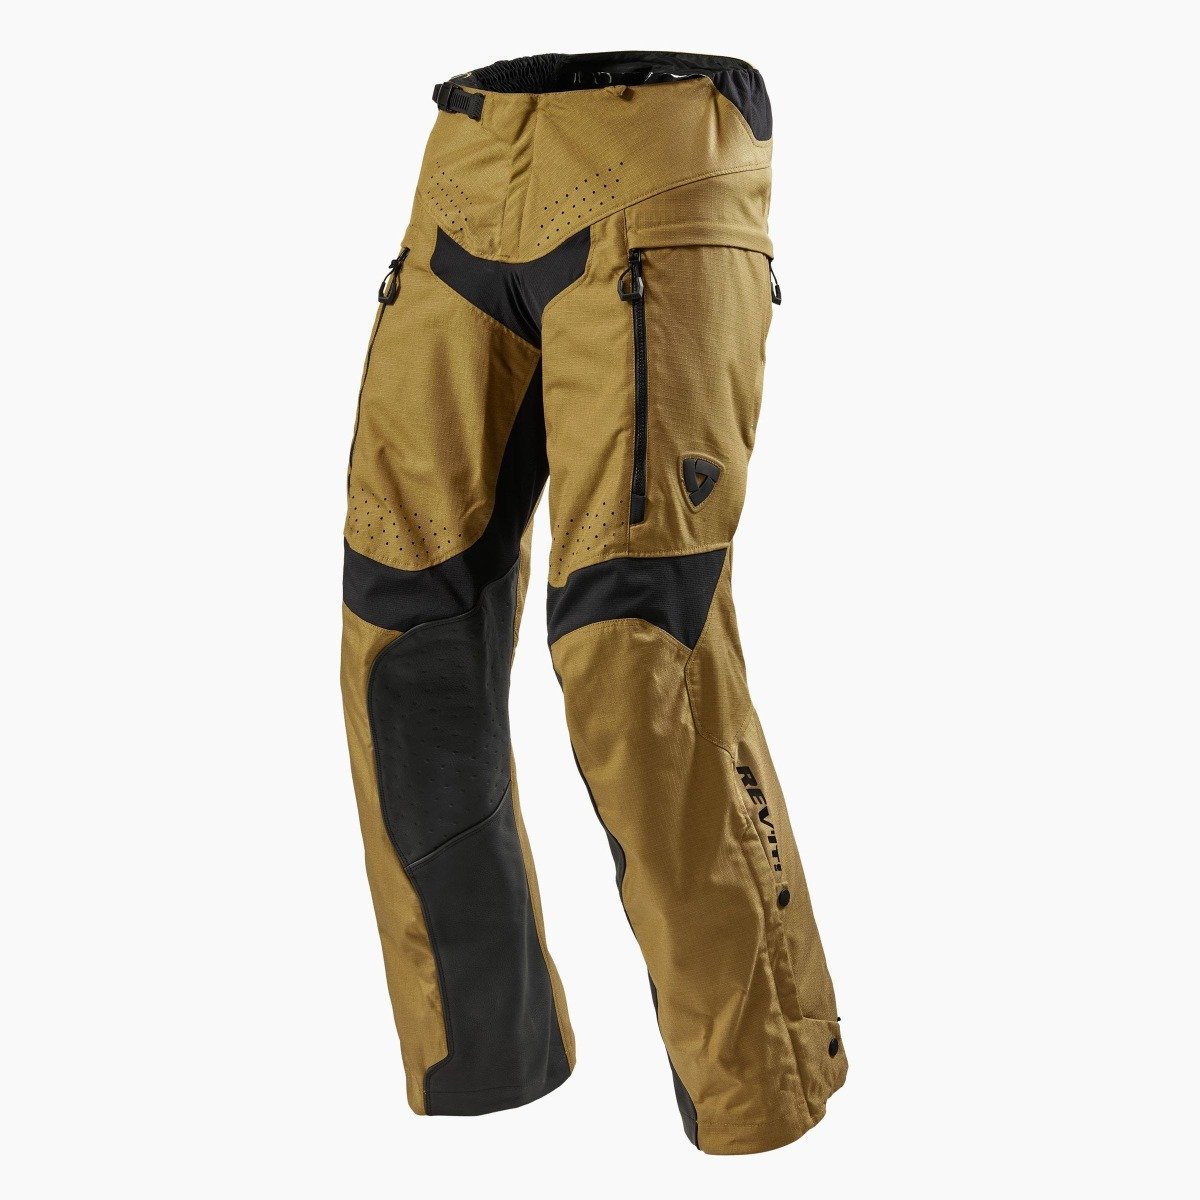 Image of REV'IT! Continent Ocher Yellow Motorcycle Pants Size S EN